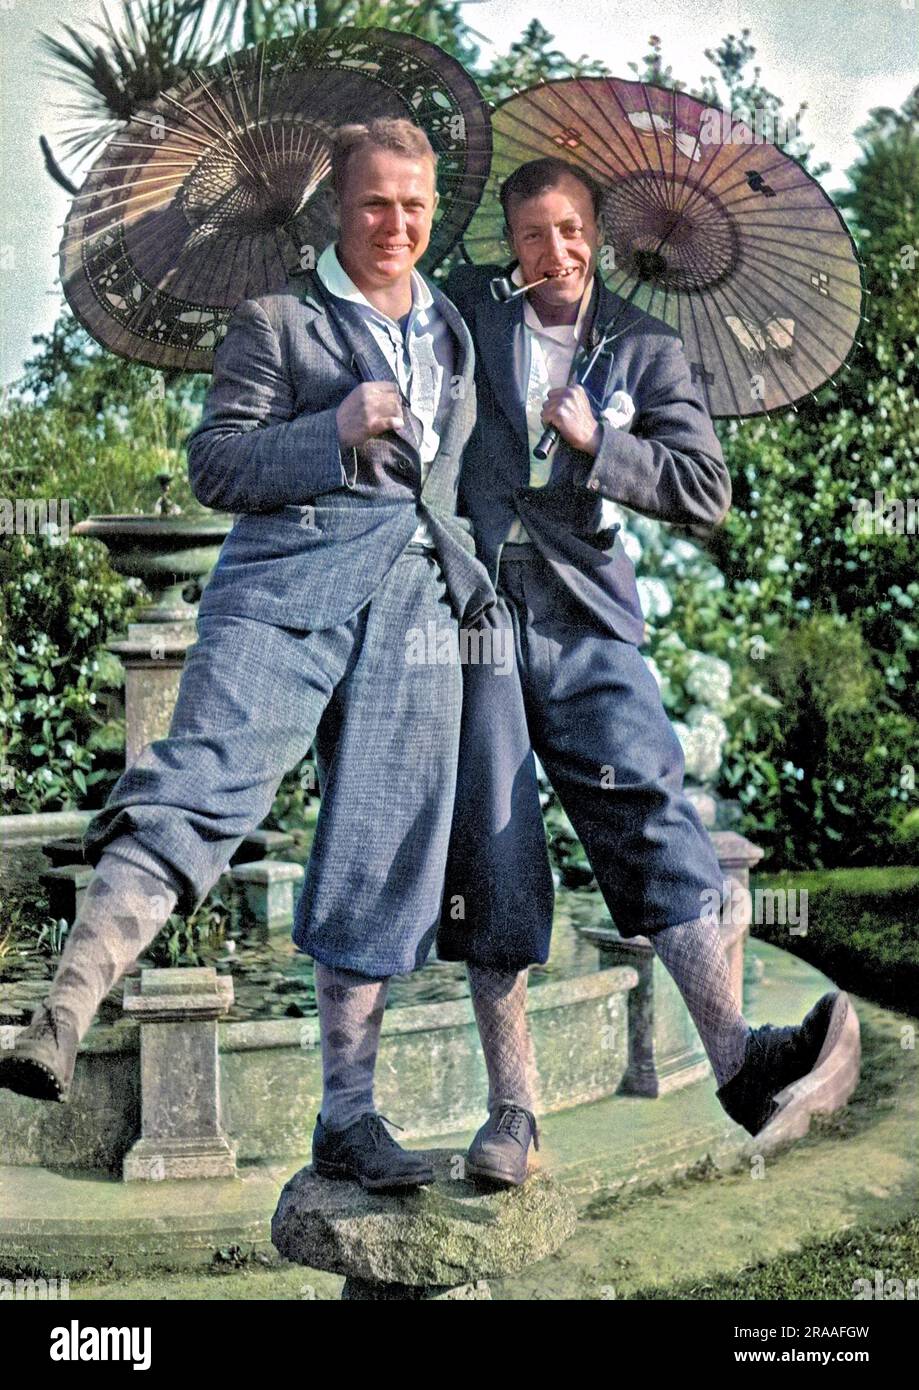 Two men in plus fours and golfing socks, holding parasols, balancing on a stone. Stock Photo